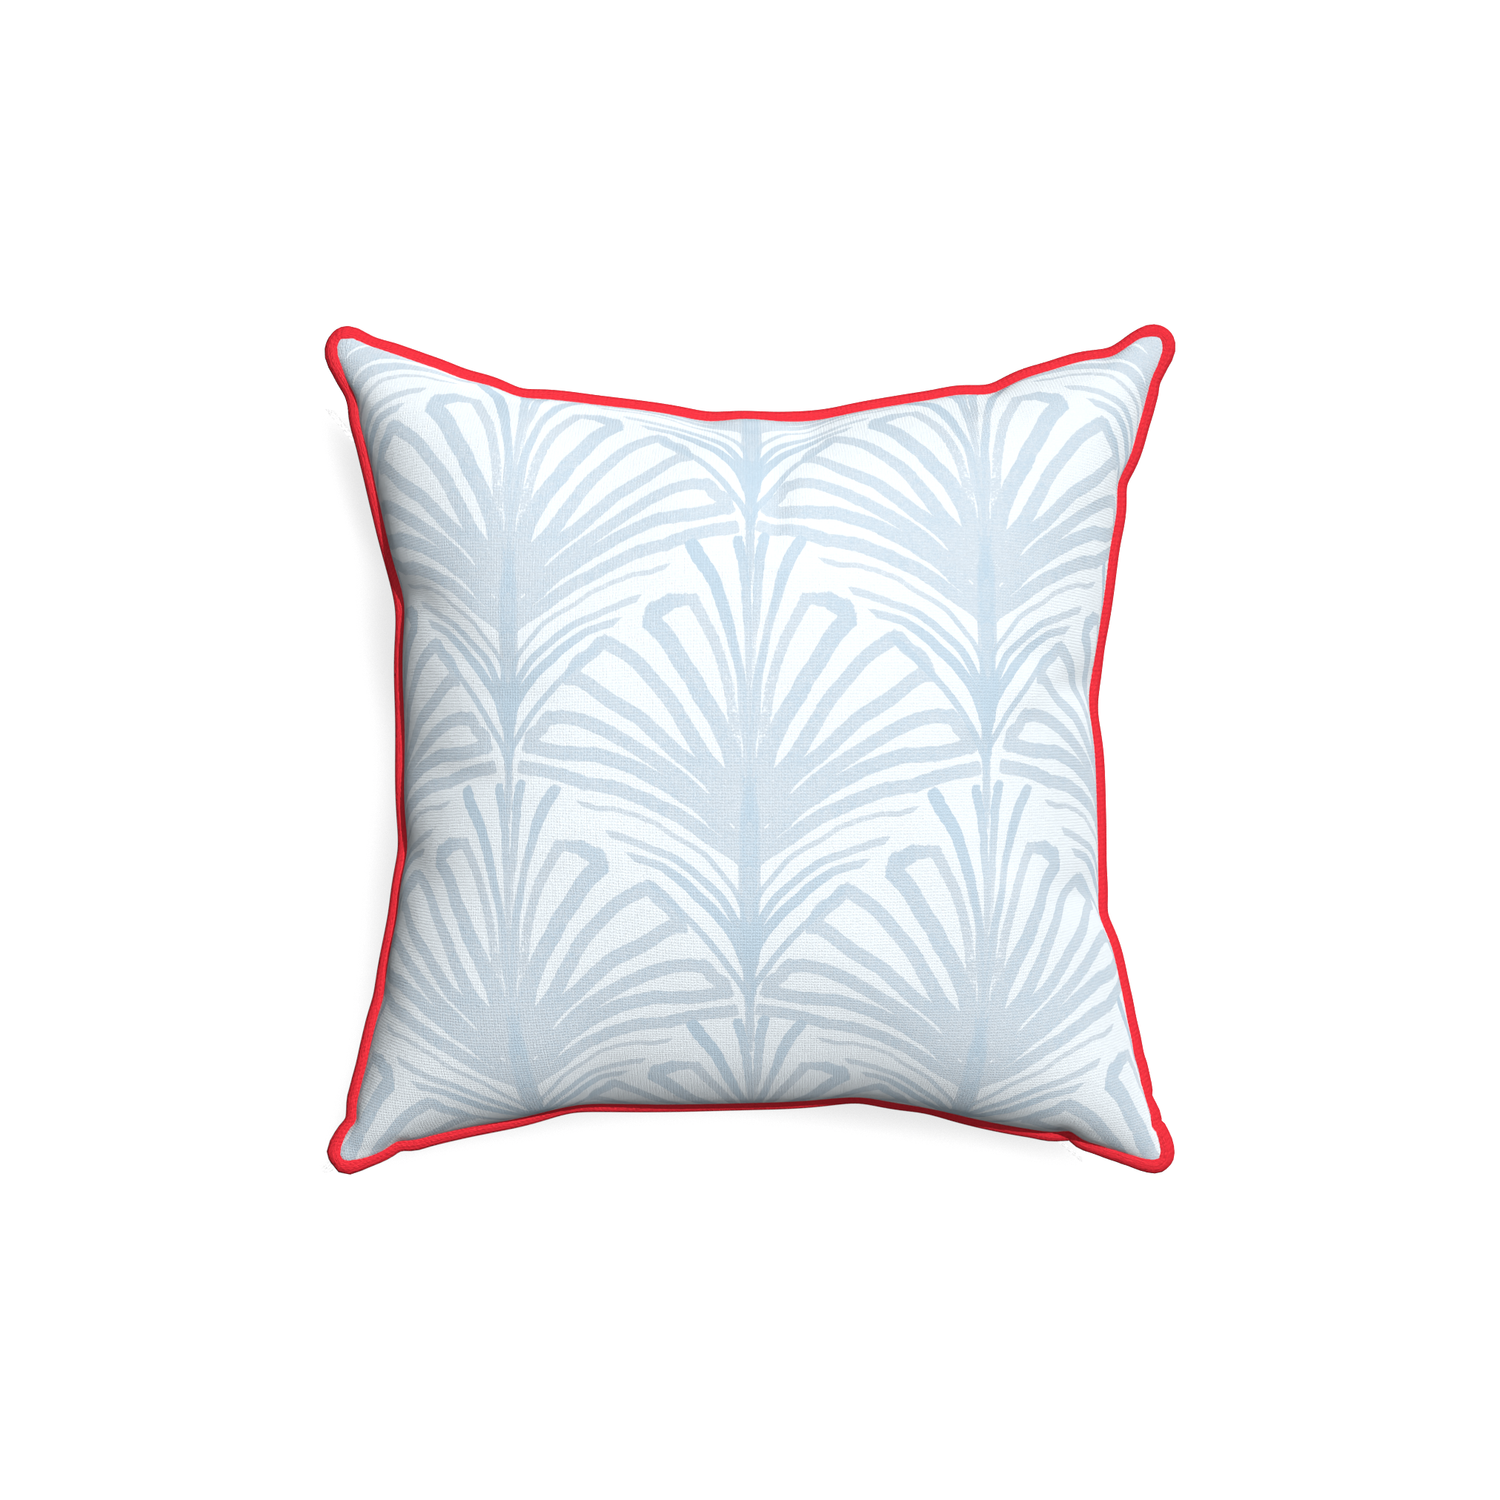 18-square suzy sky custom pillow with cherry piping on white background